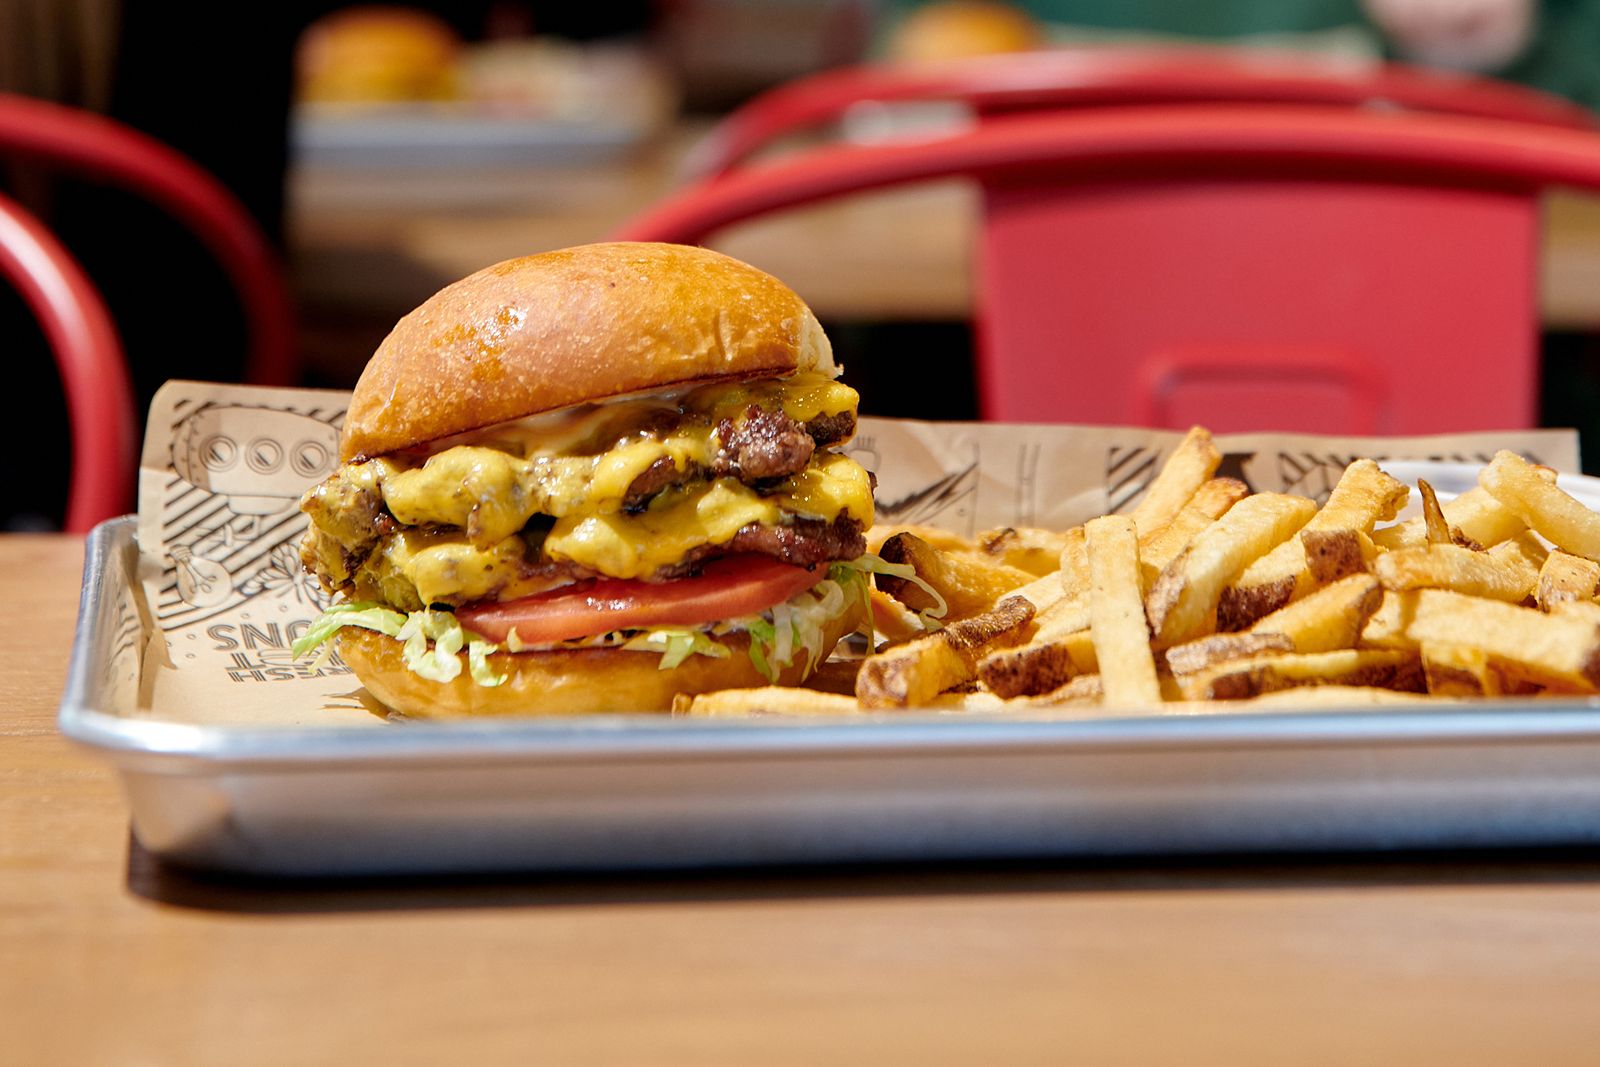 MOOYAH Burgers, Fries & Shakes Offers Free Burgers This February